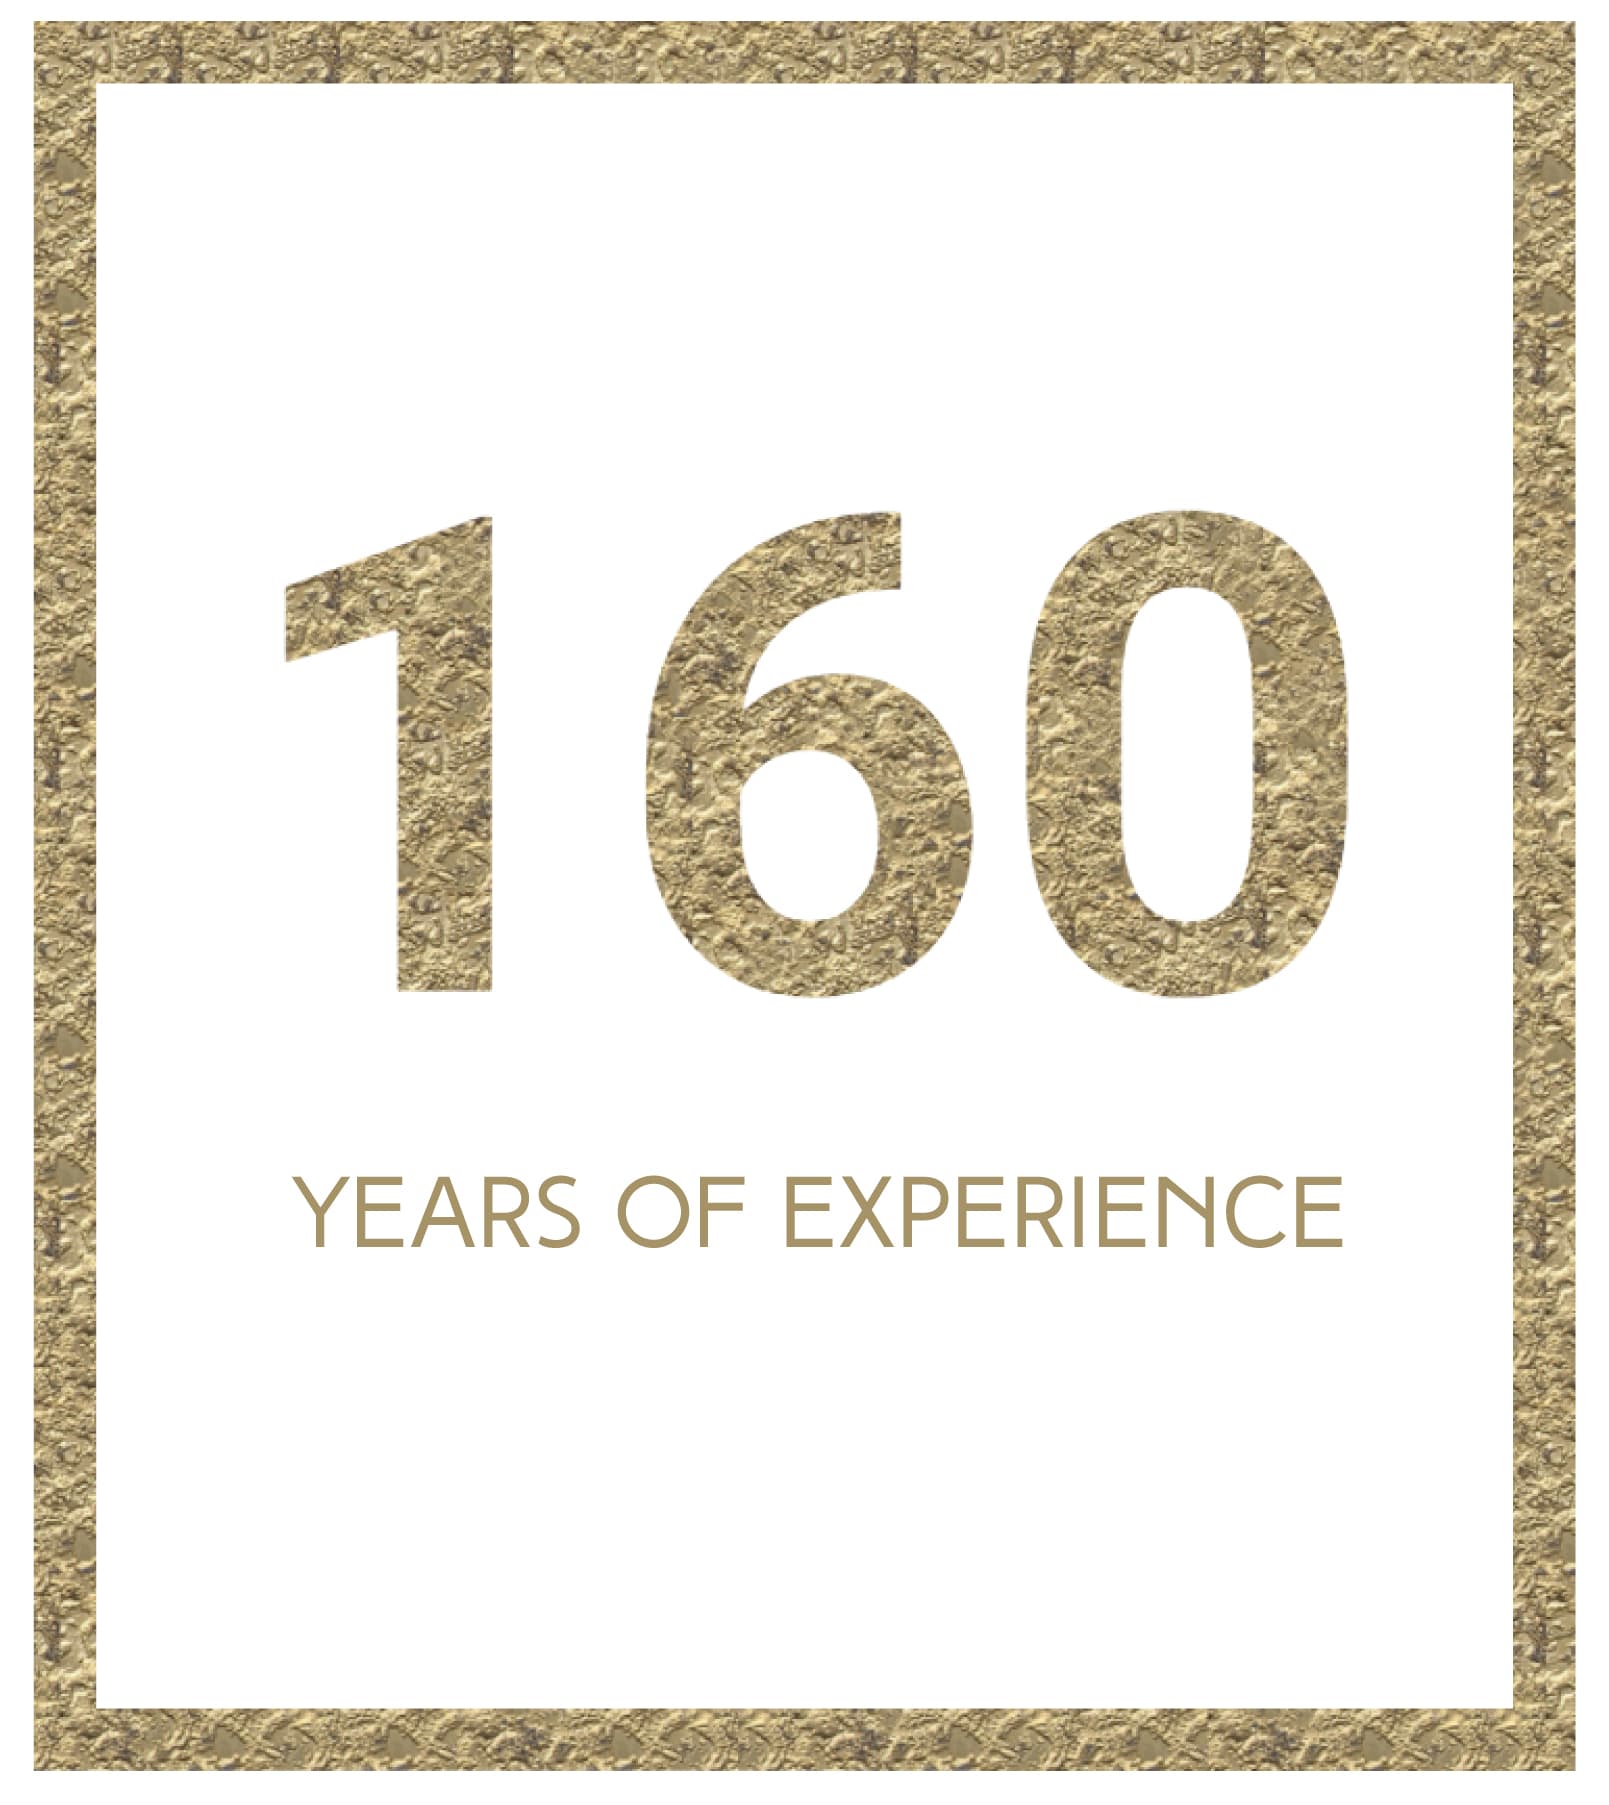 Rennotte_about us_160 years of experience